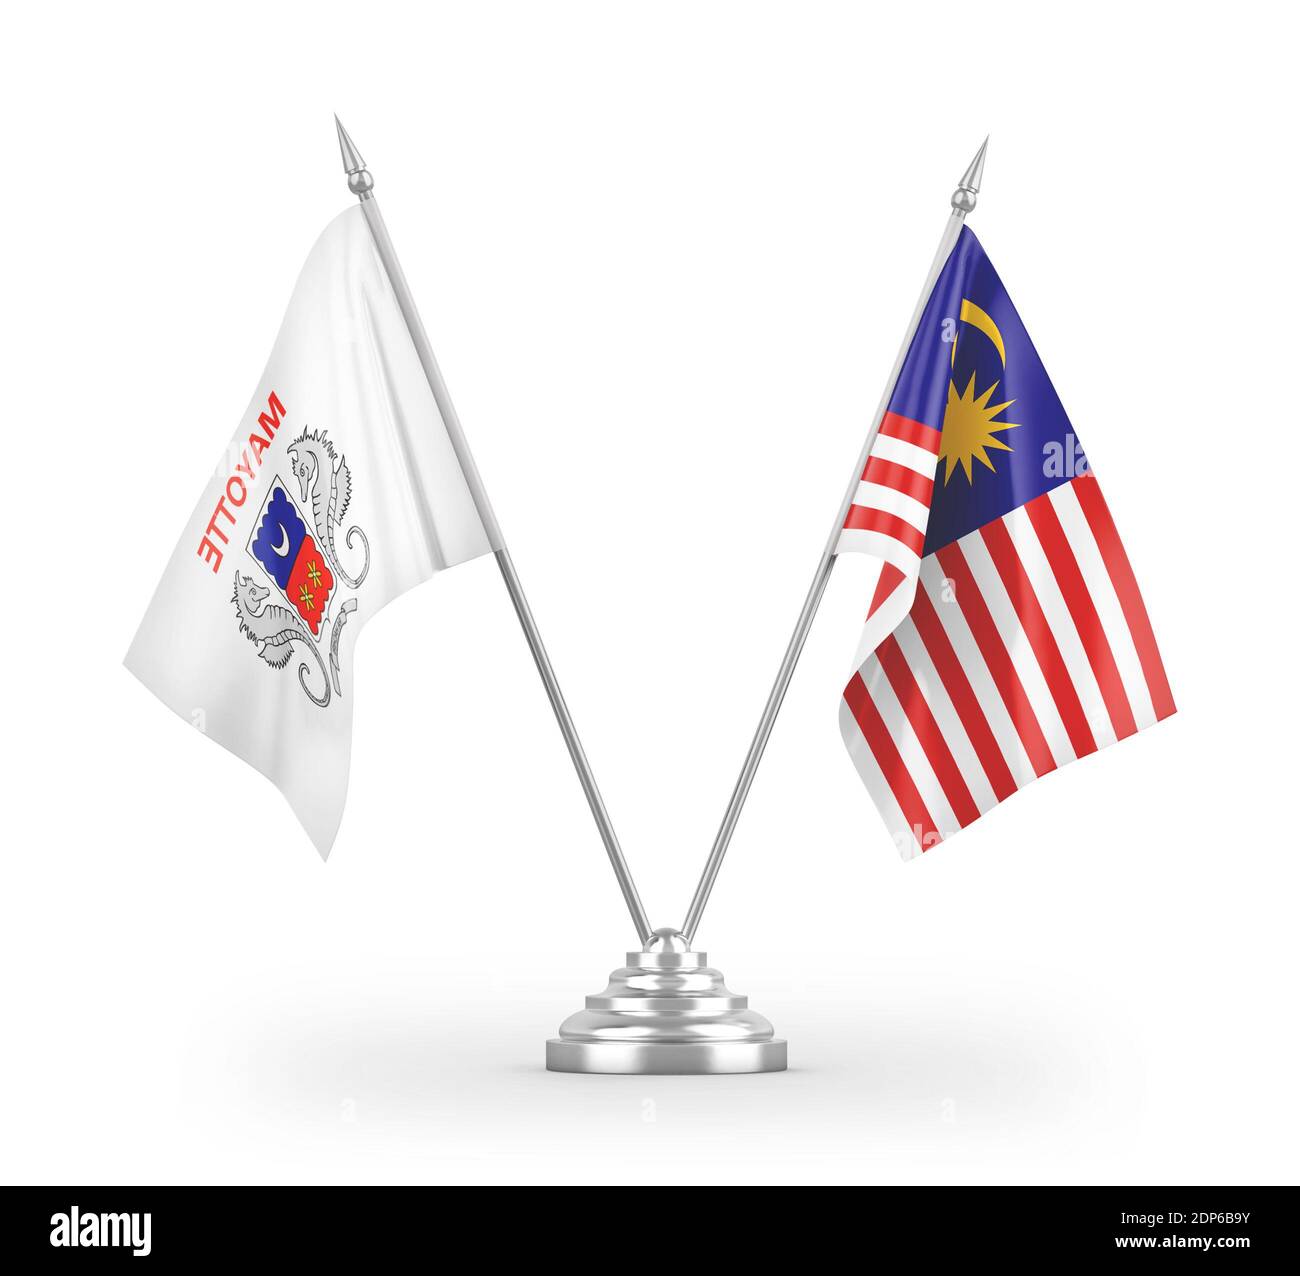 Malaysia mayotte flag Cut Out Stock Images & Pictures - Alamy